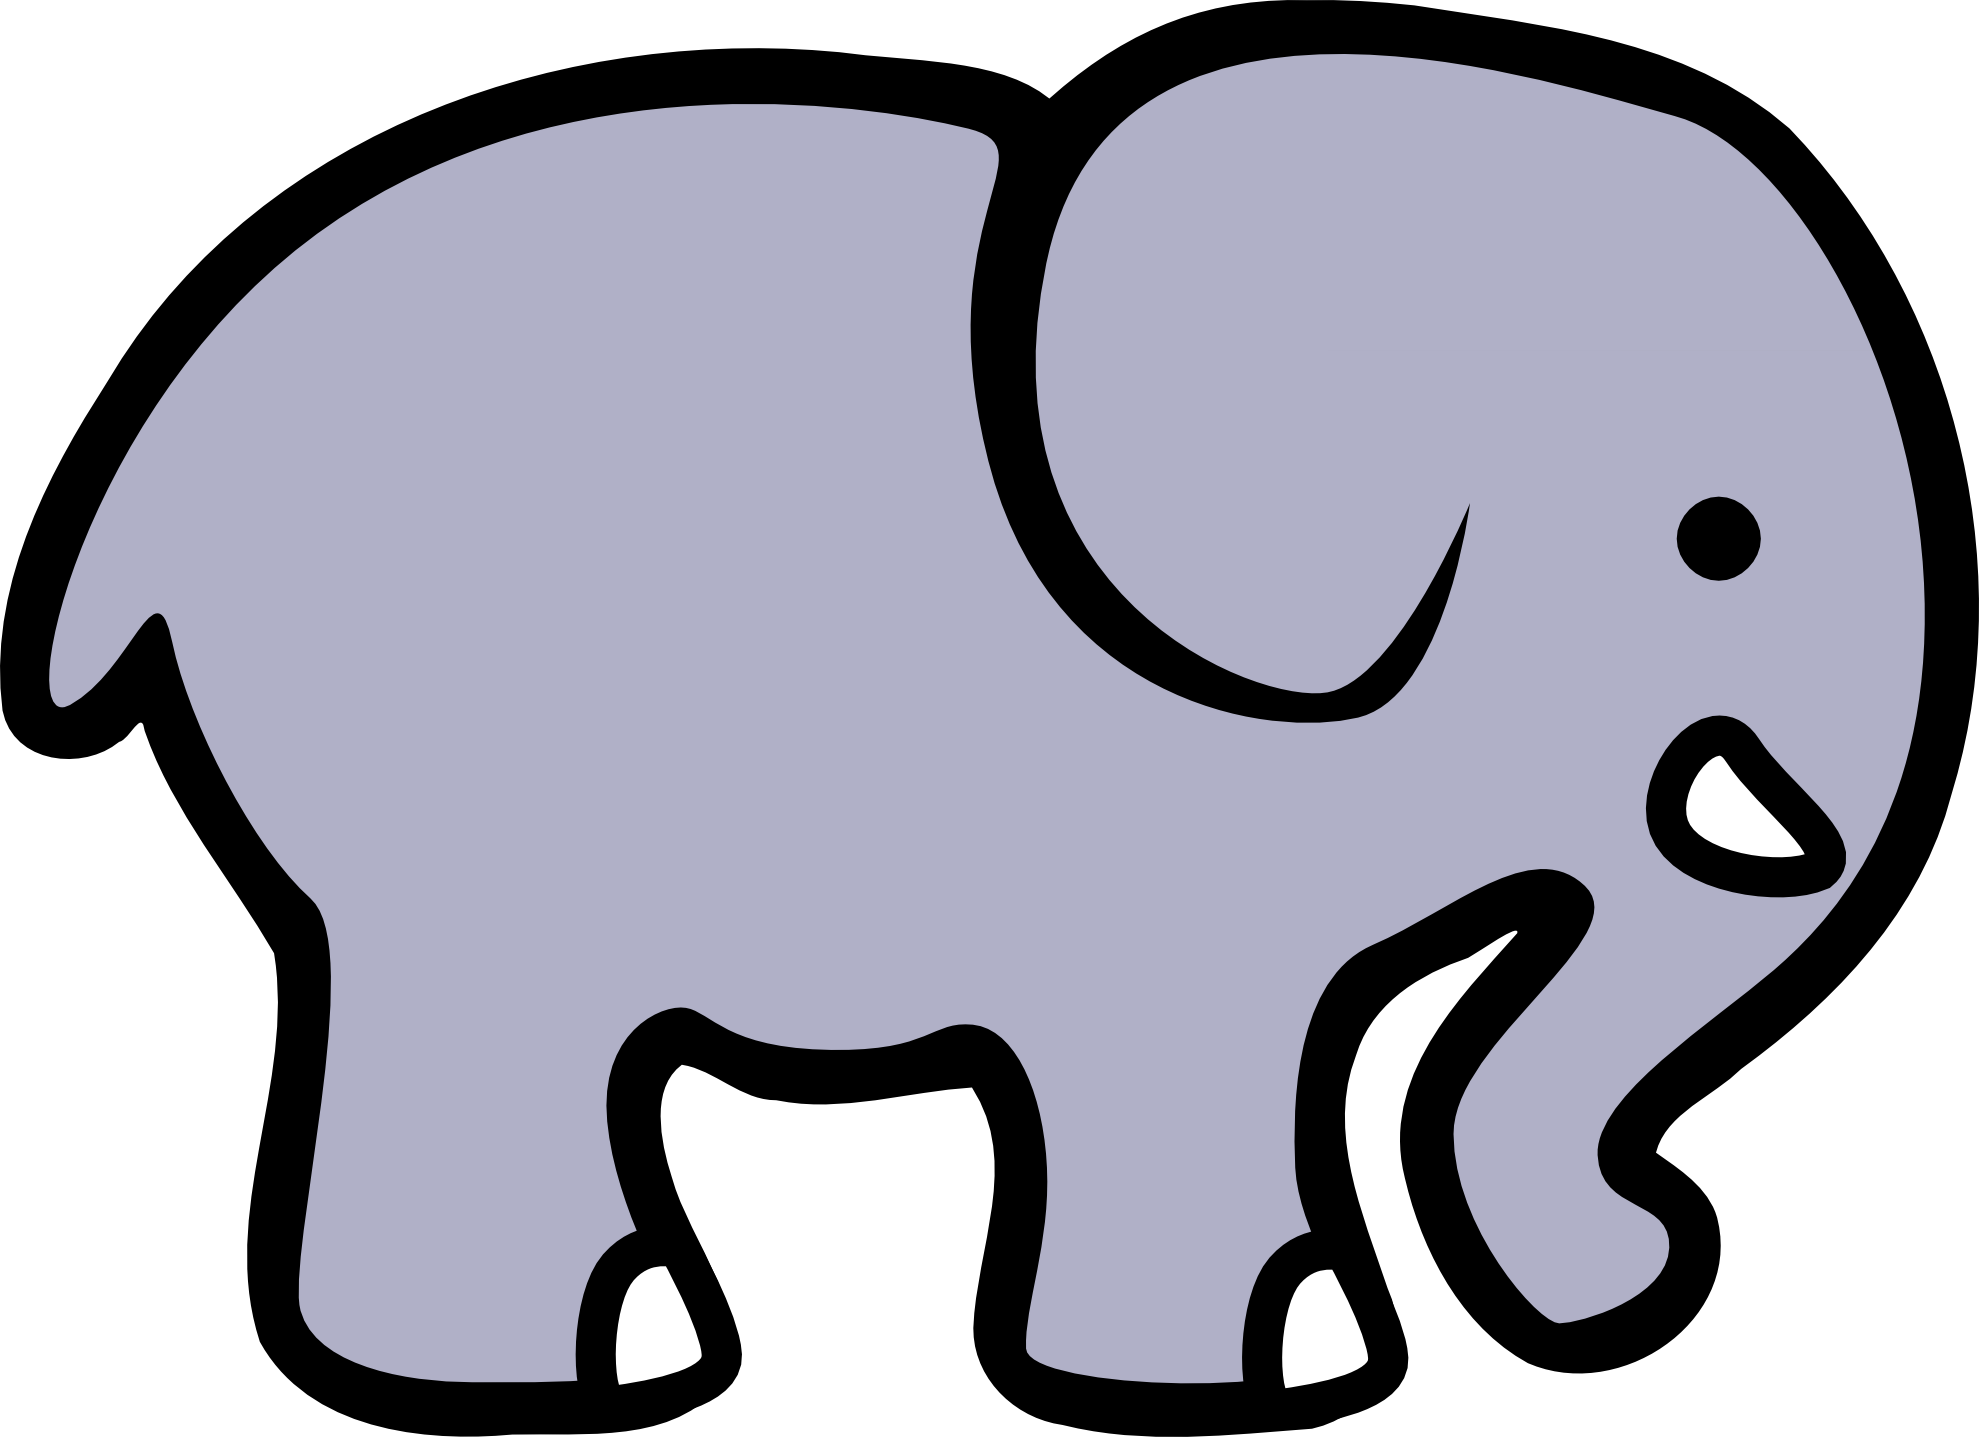 elephant clipart black and wh - Clipart Of Elephant